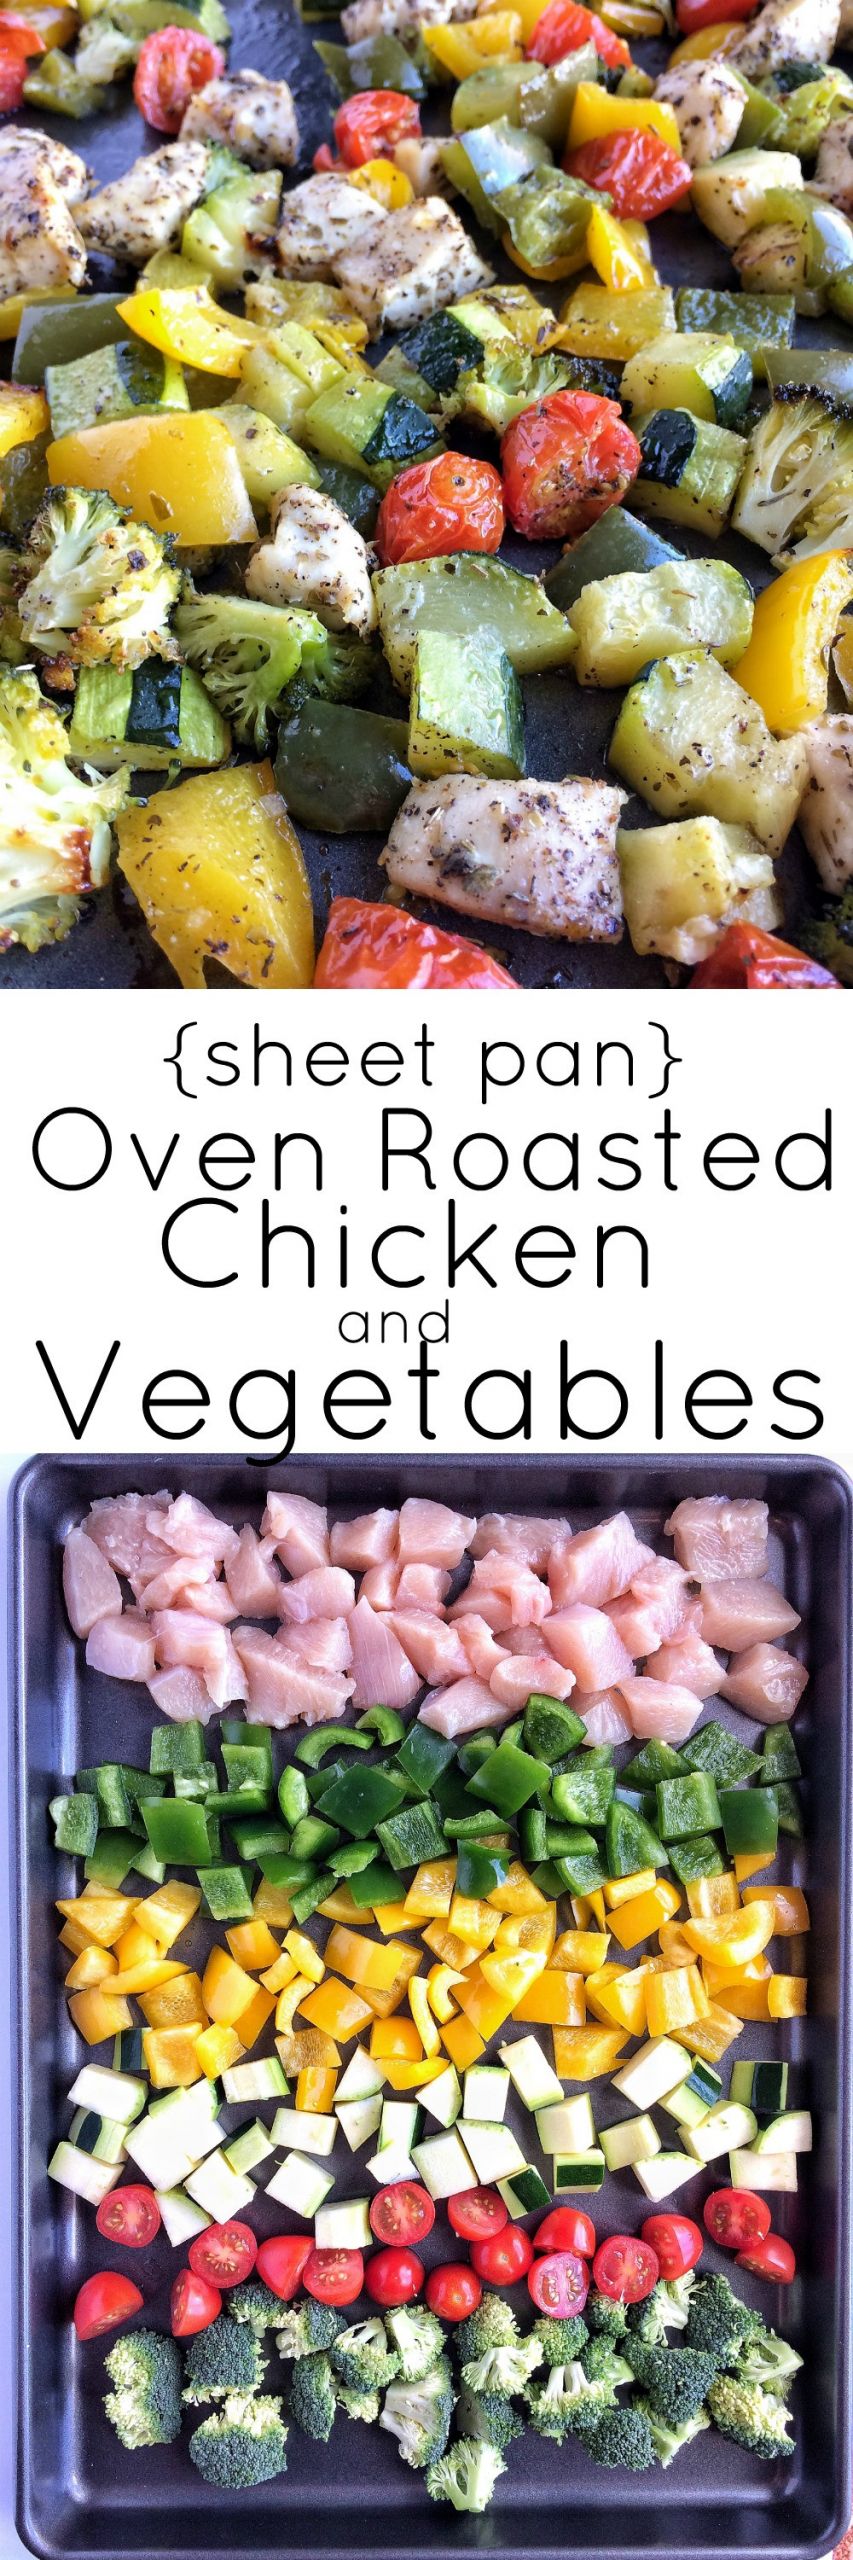 Oven Roasted Chicken And Veggies
 Oven Roasted Chicken and Ve ables To her as Family